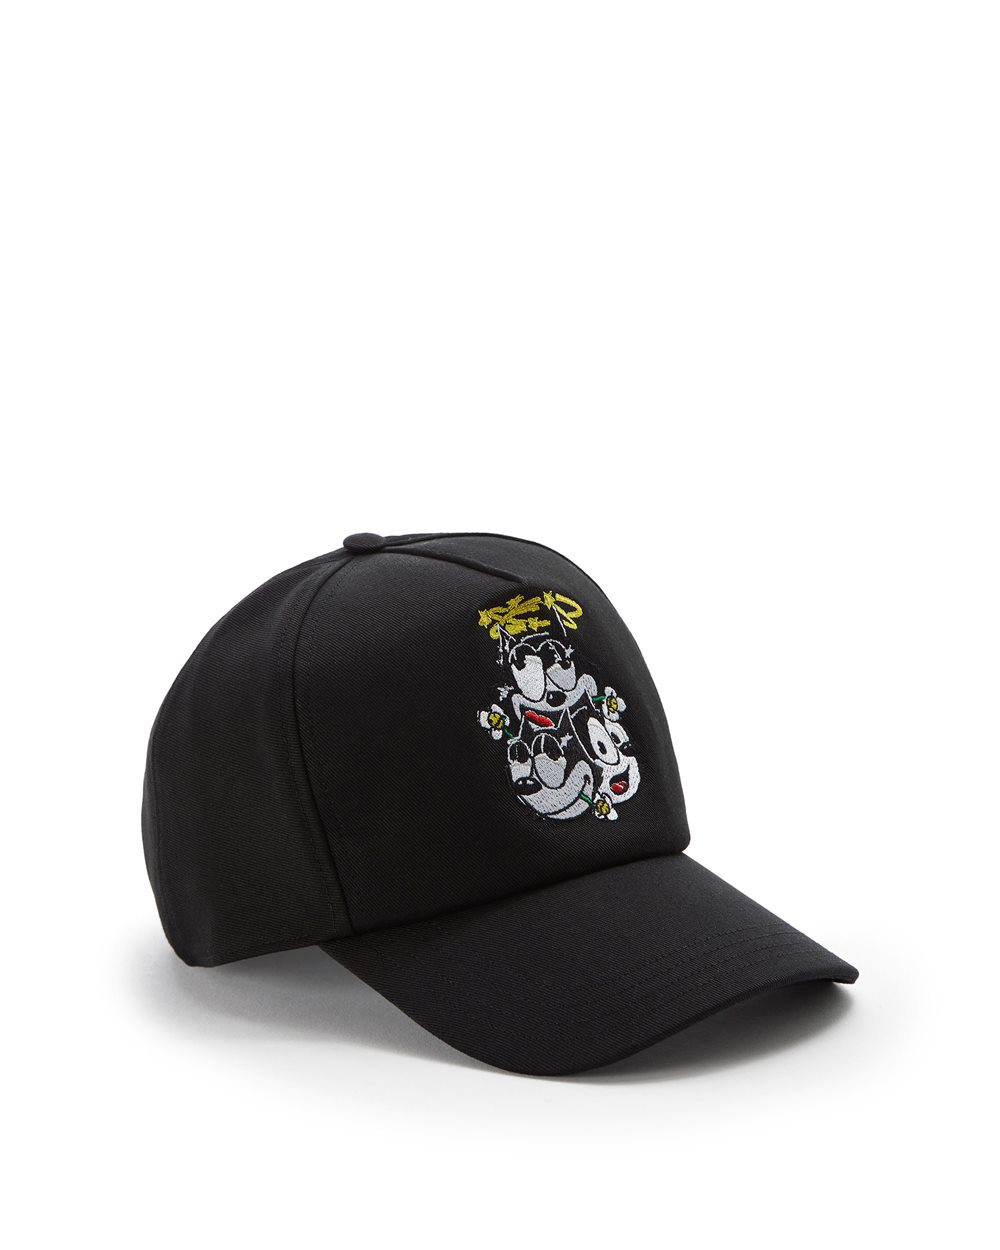 Baseball hat with cartoon graphics and logo - Accessories | Iceberg - Official Website